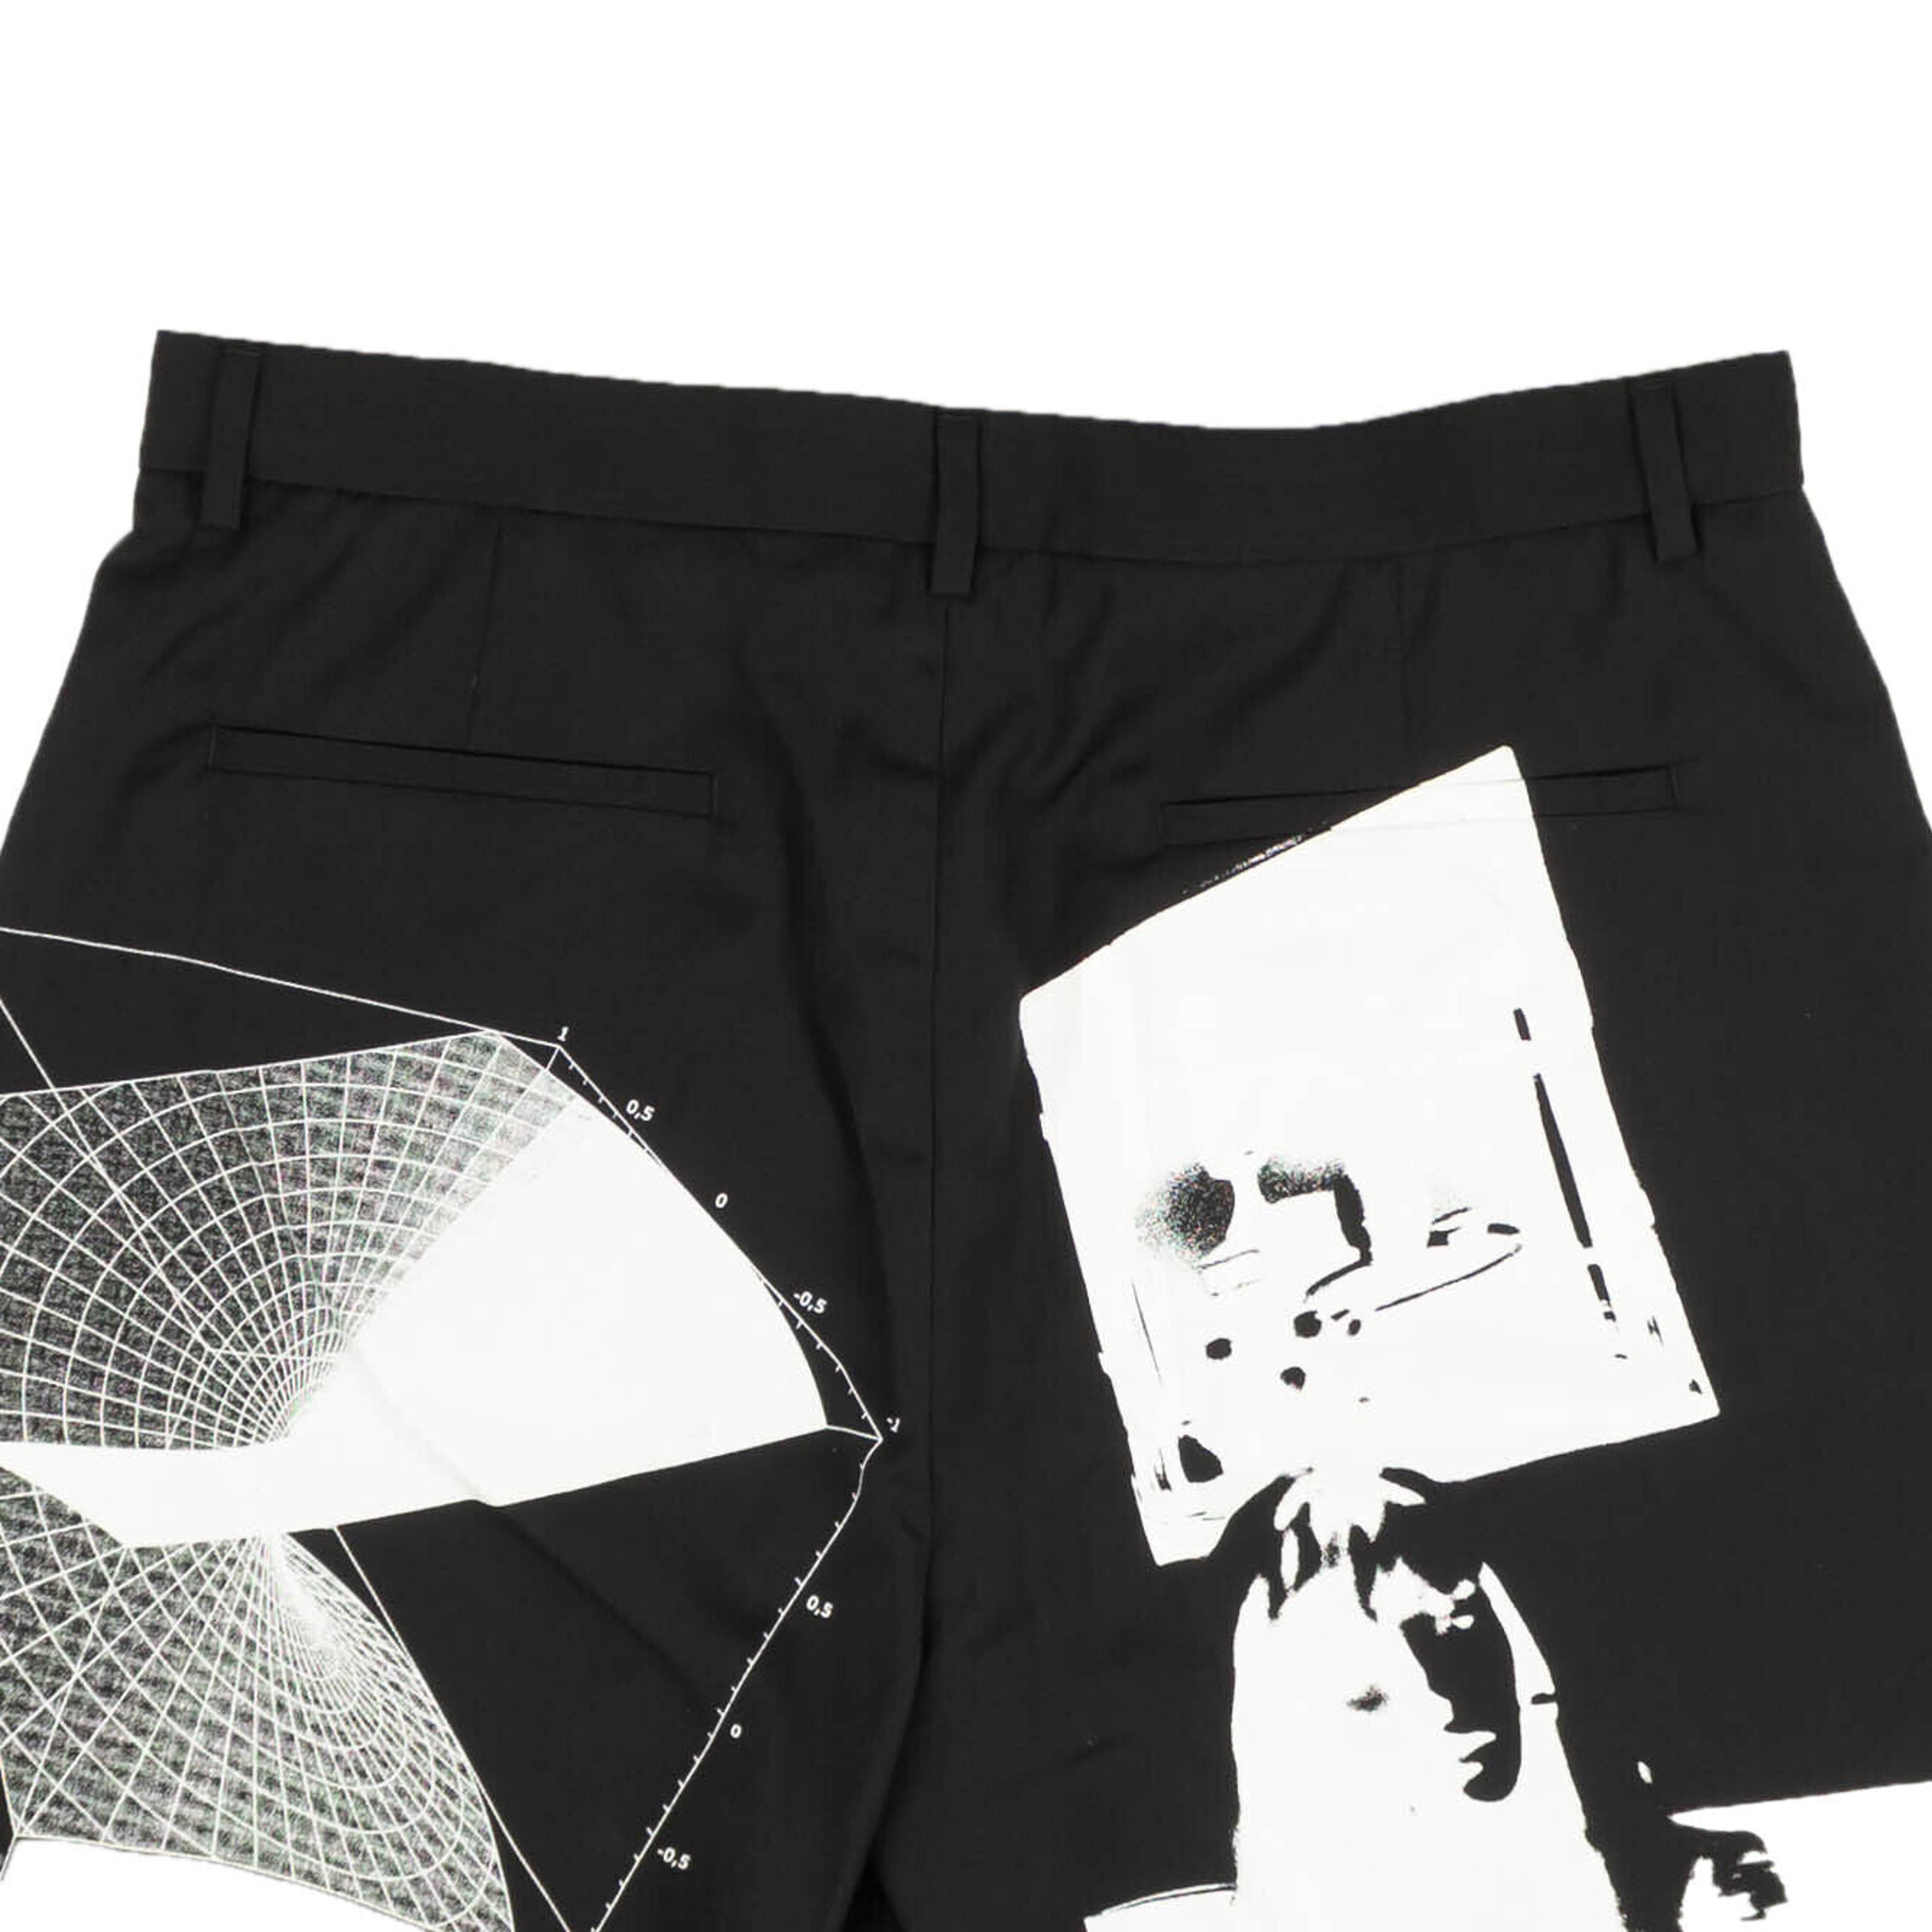 Alternate View 3 of Black And White Swonprint Suit Shorts